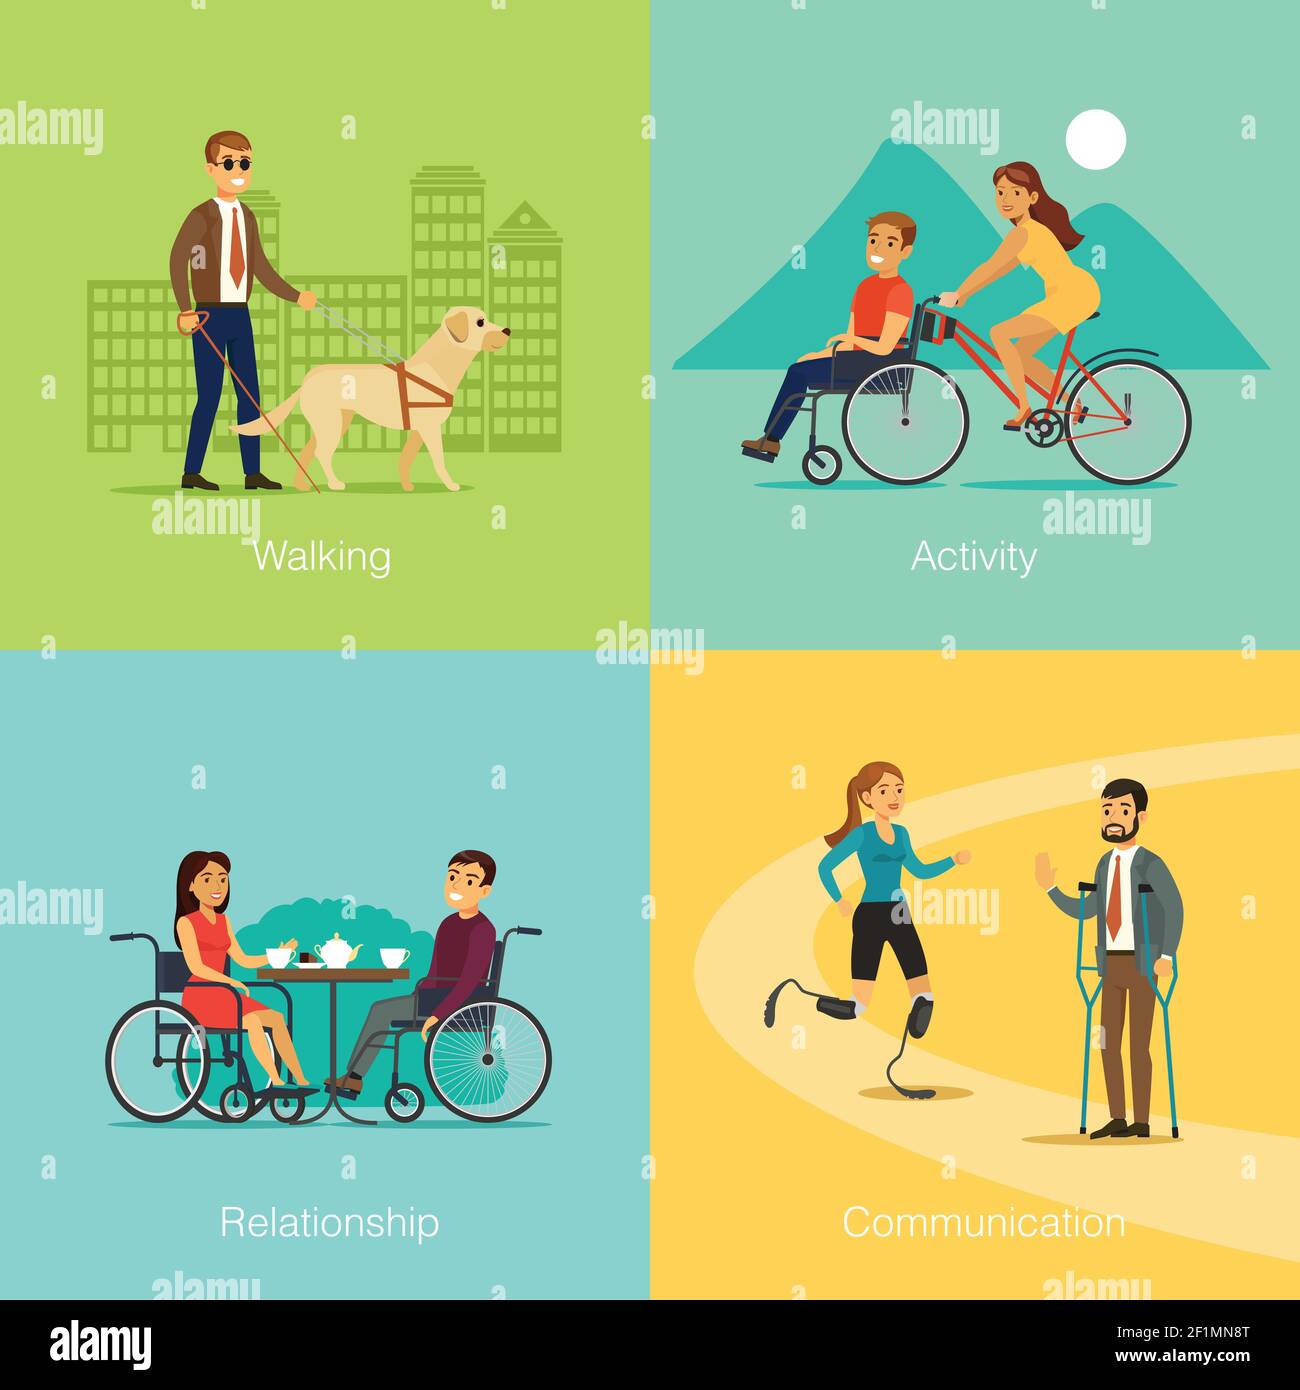 Disabled people square concept of blind man walking with dog special bicycle for traveling romantic relationship and communication between invalids ve Stock Vector